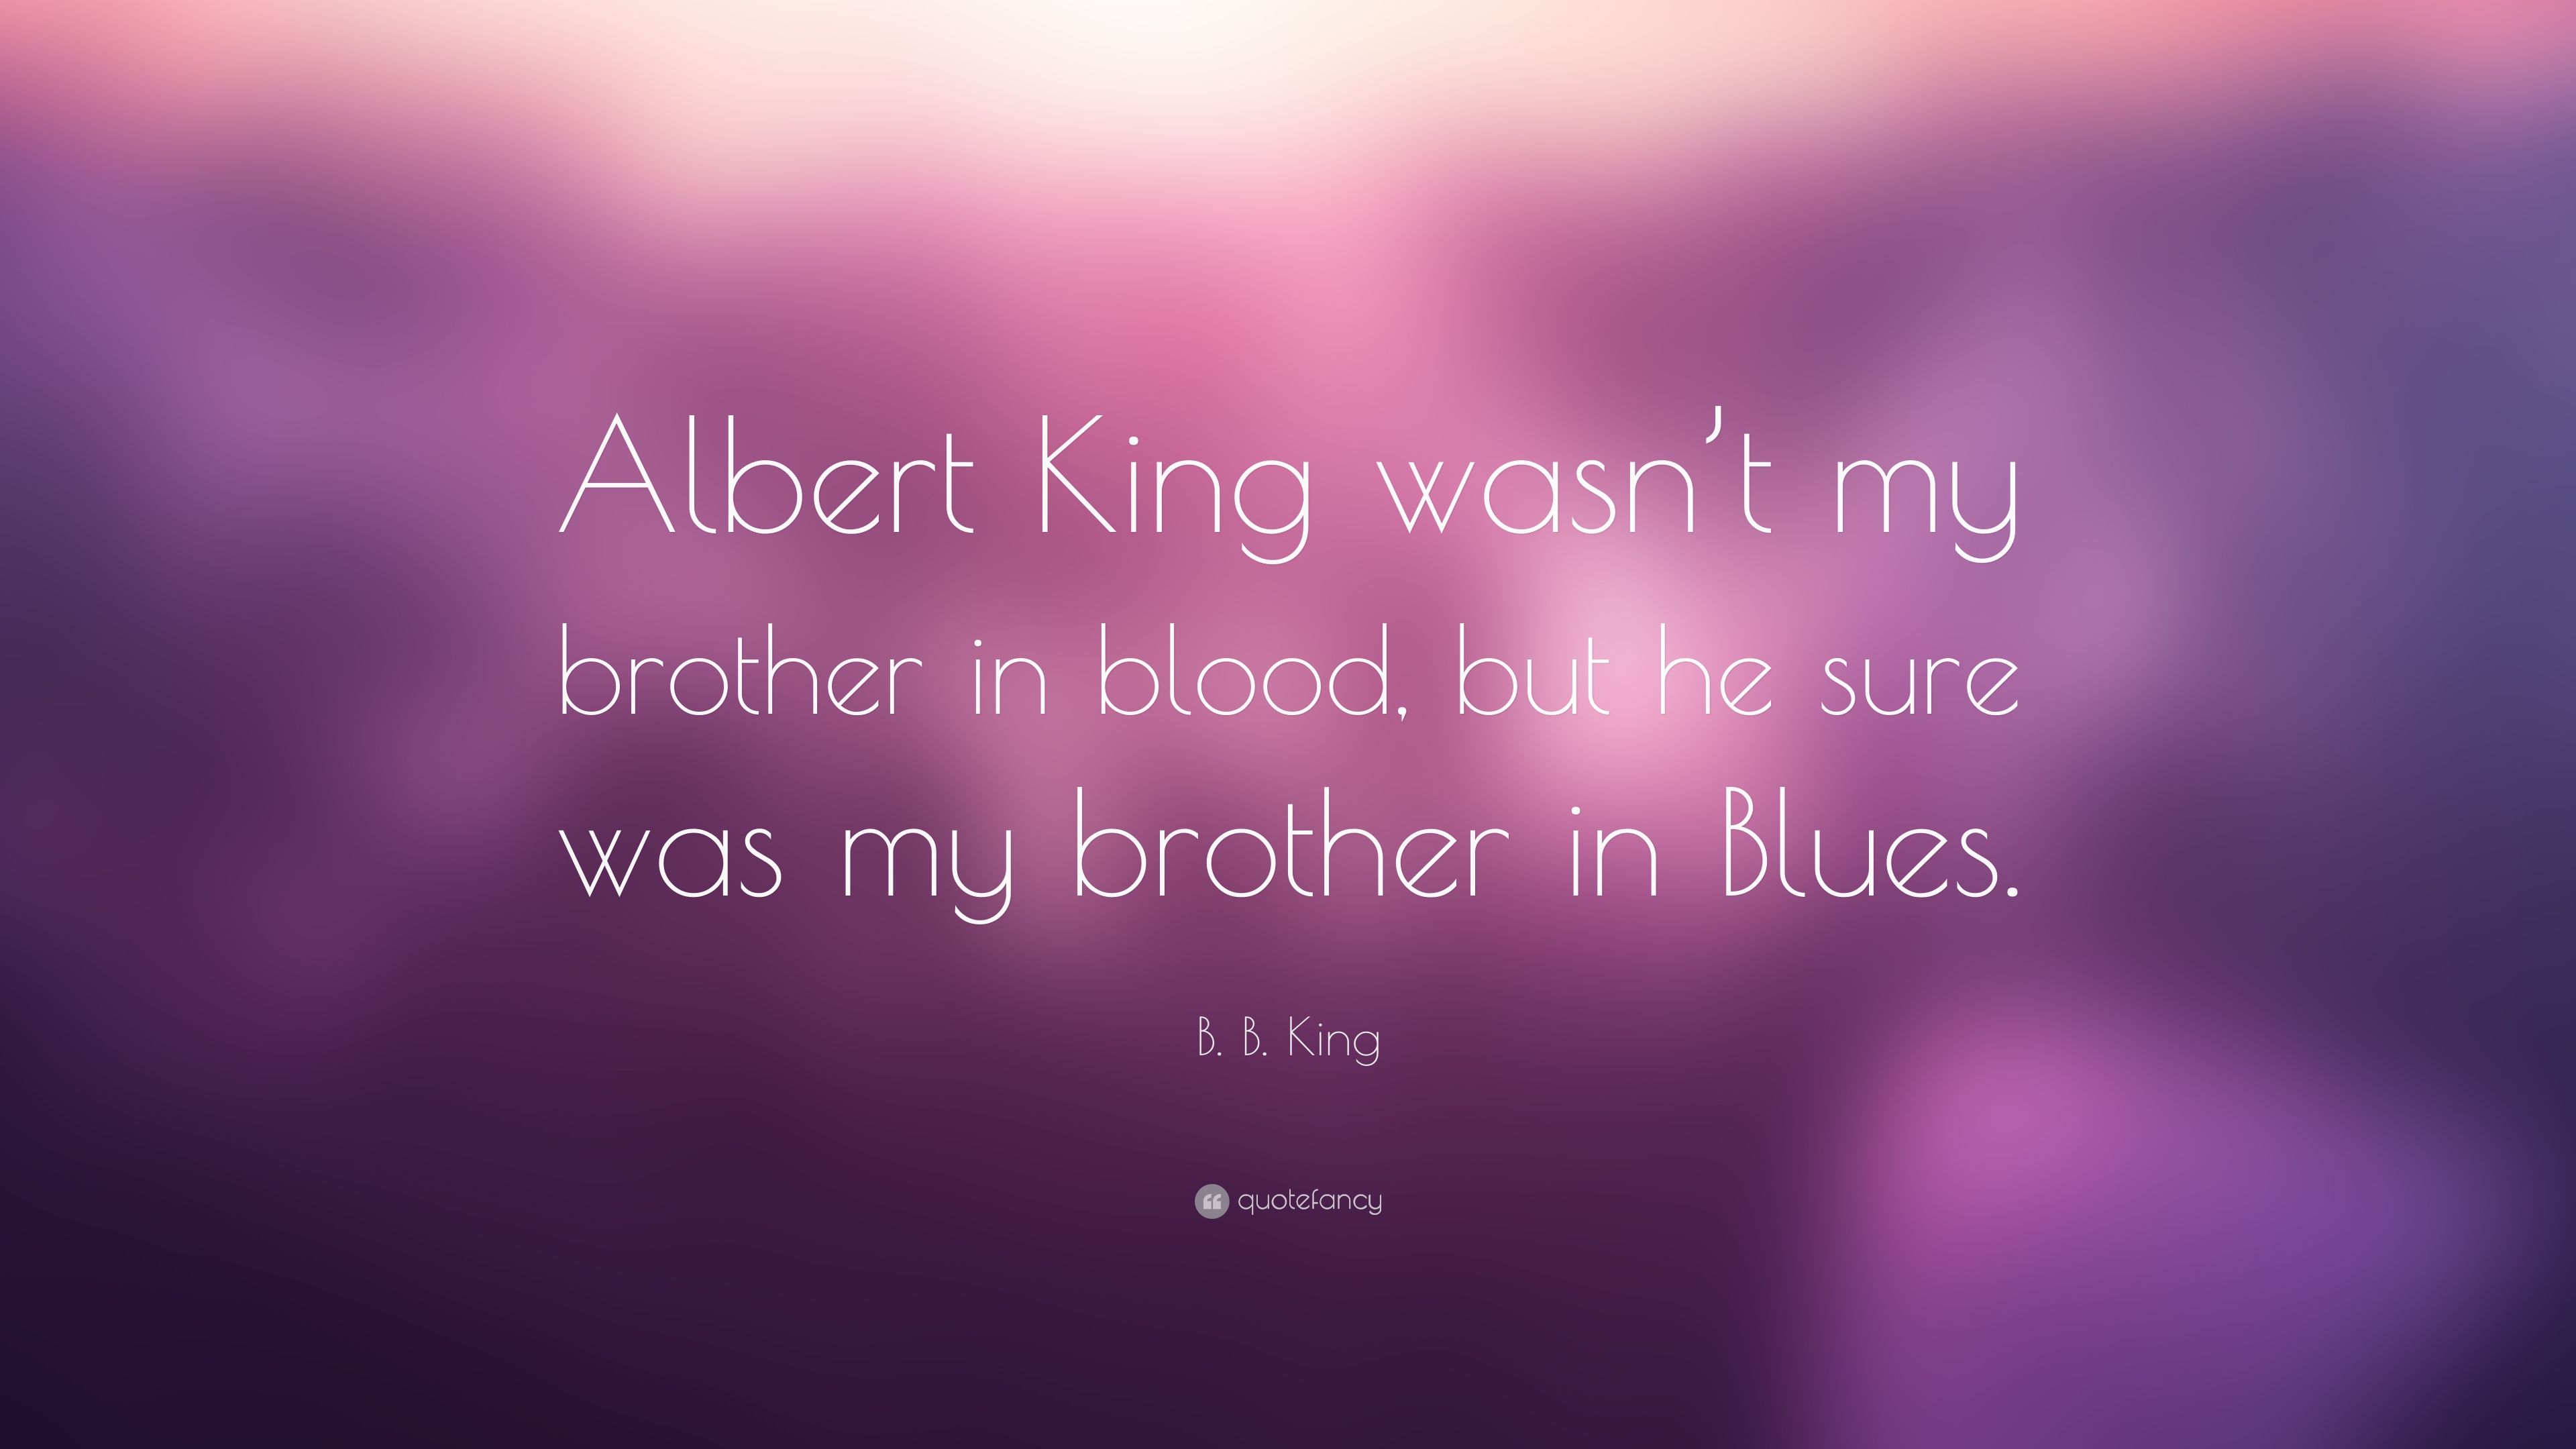 B. B. King Quote: “Albert King wasn't my brother in blood, but he sure was my brother in Blues.” (7 wallpaper)